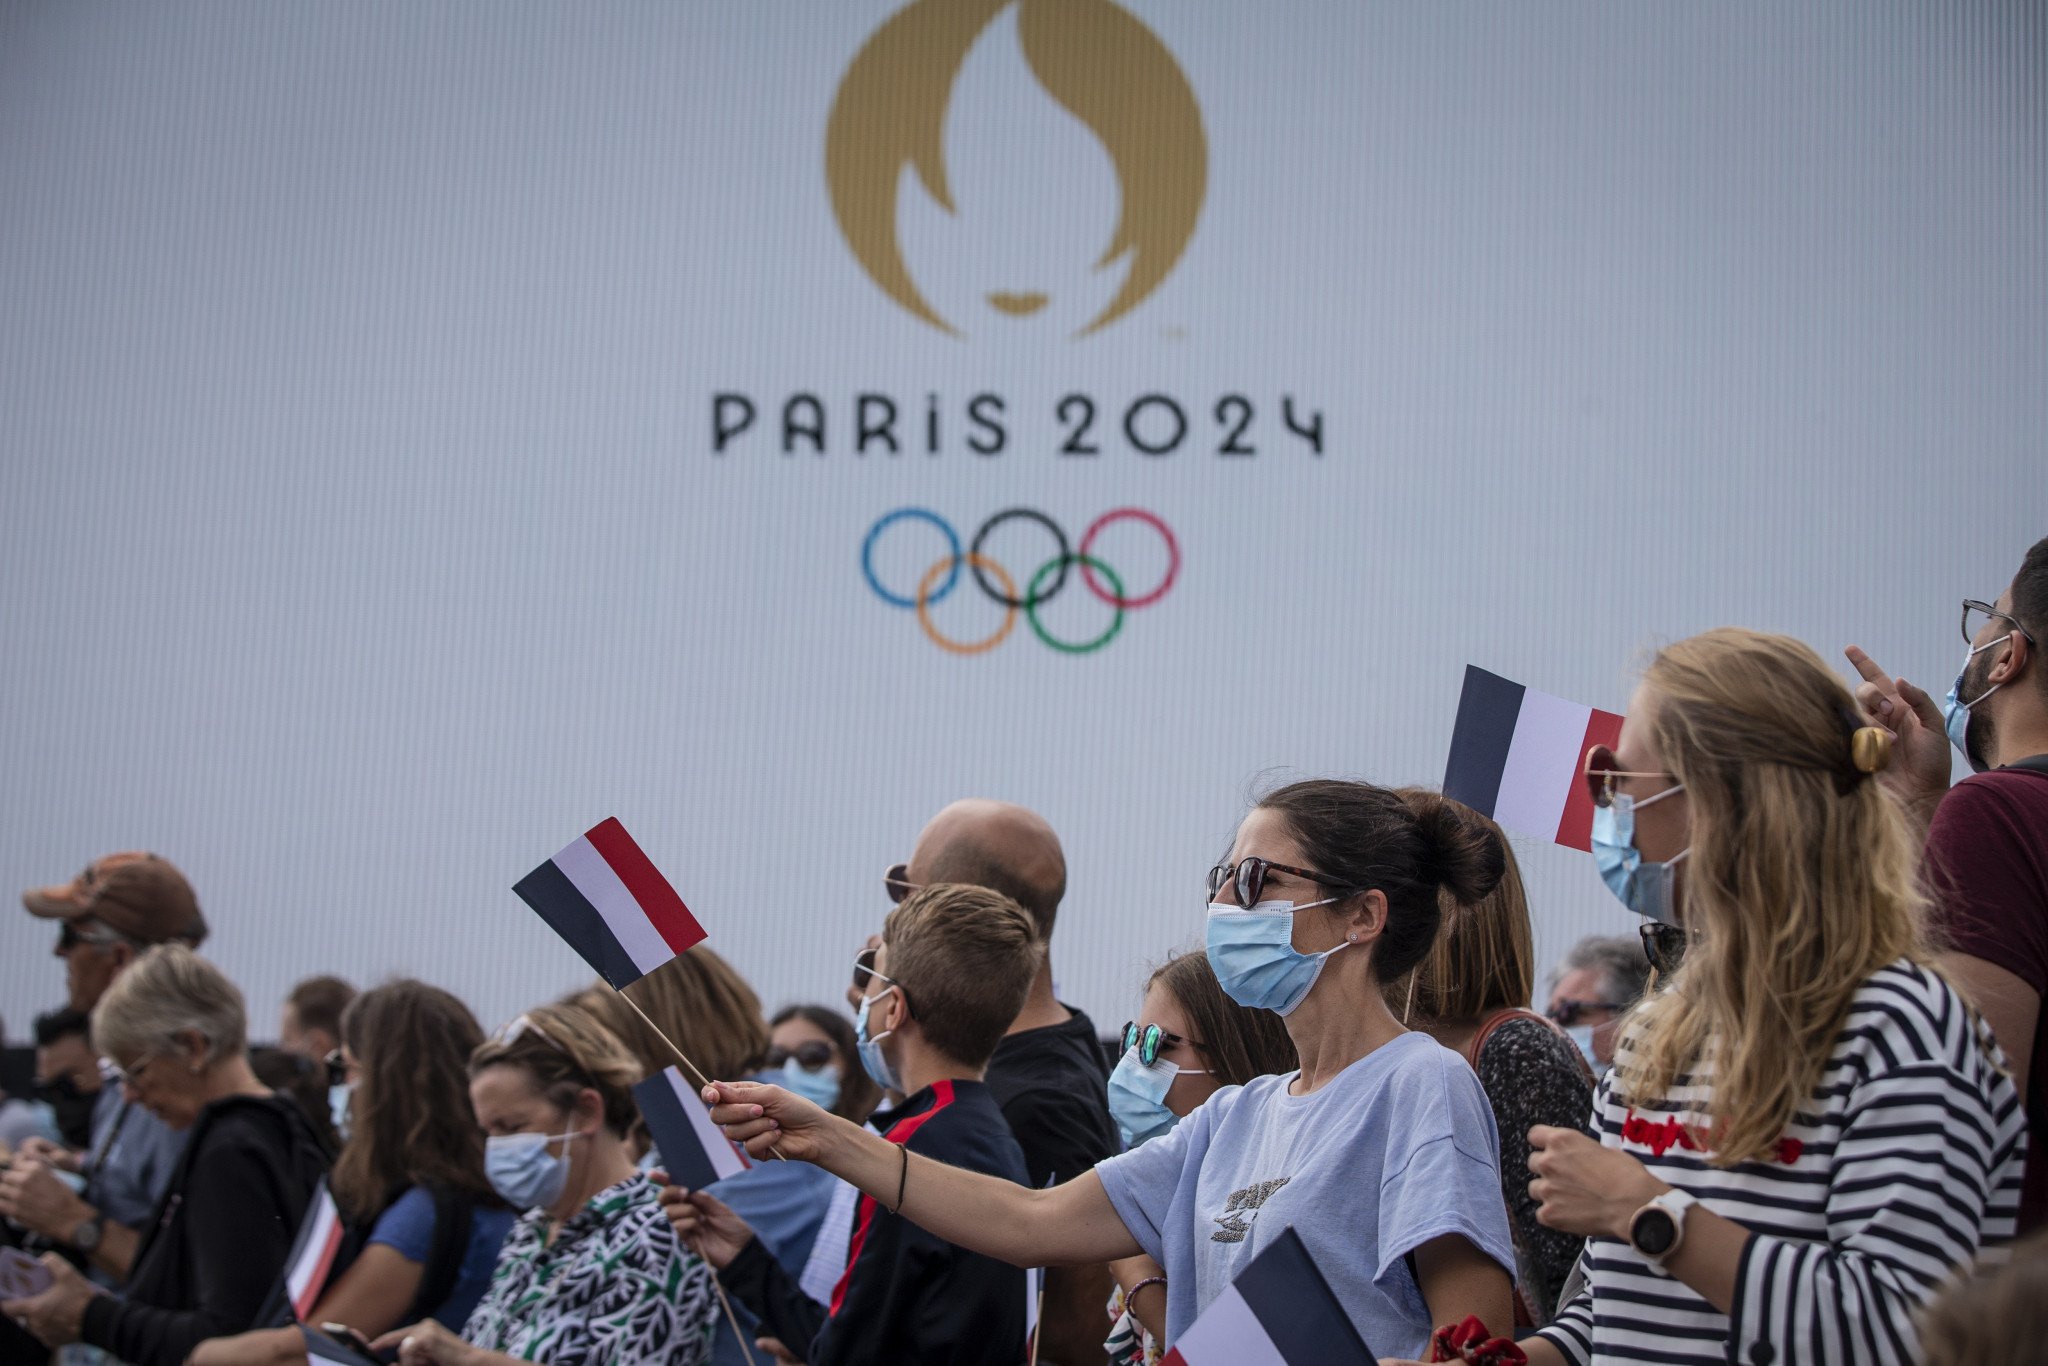 Paris 2024 head Estanguet defends cost of Olympic Torch Relay hosting as some Departments baulk at price